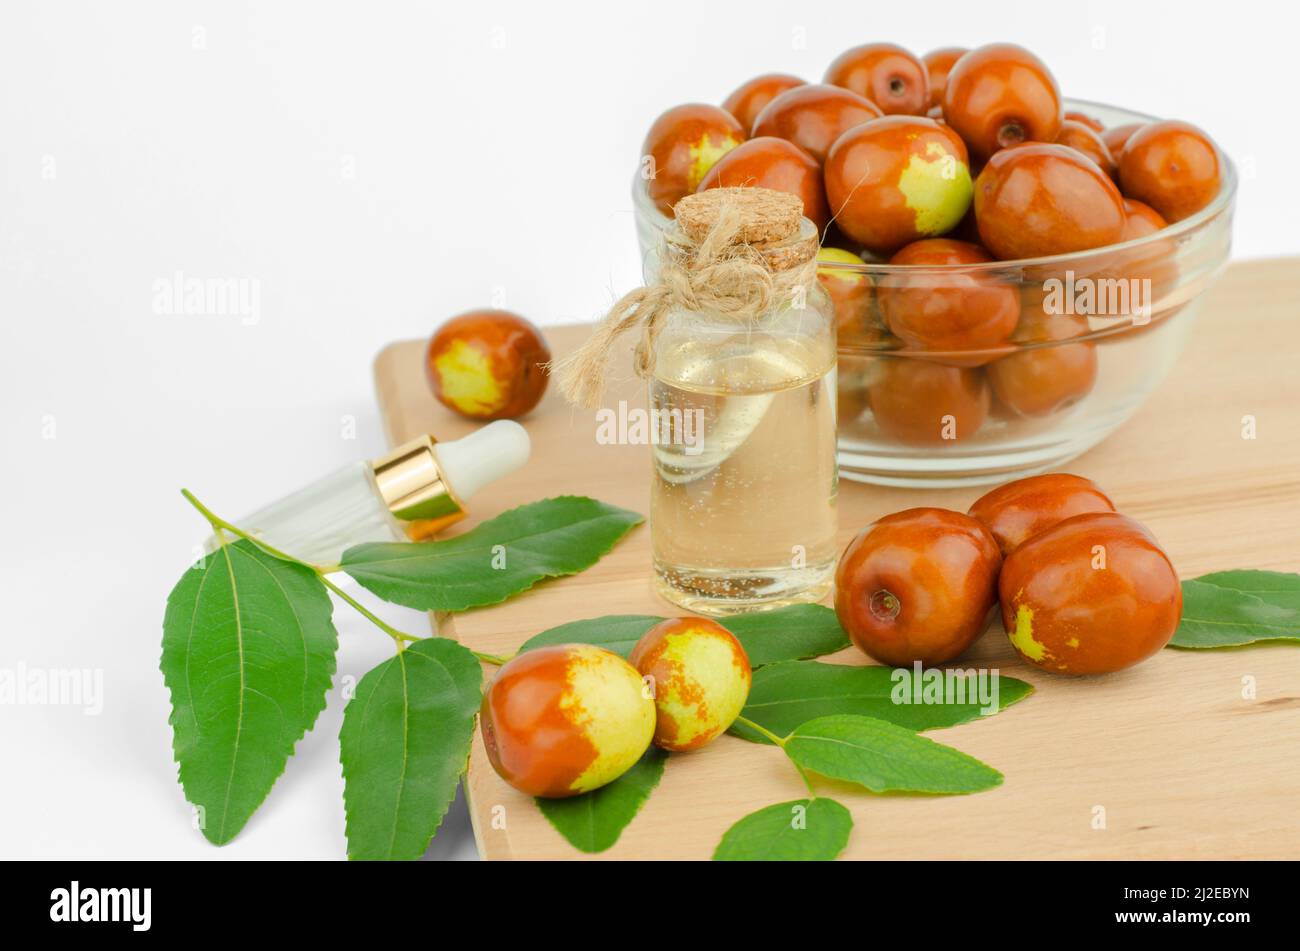 Jojoba oil in a transparent bottle on a wooden table. Fresh fruits and jojoba oil. Stock Photo